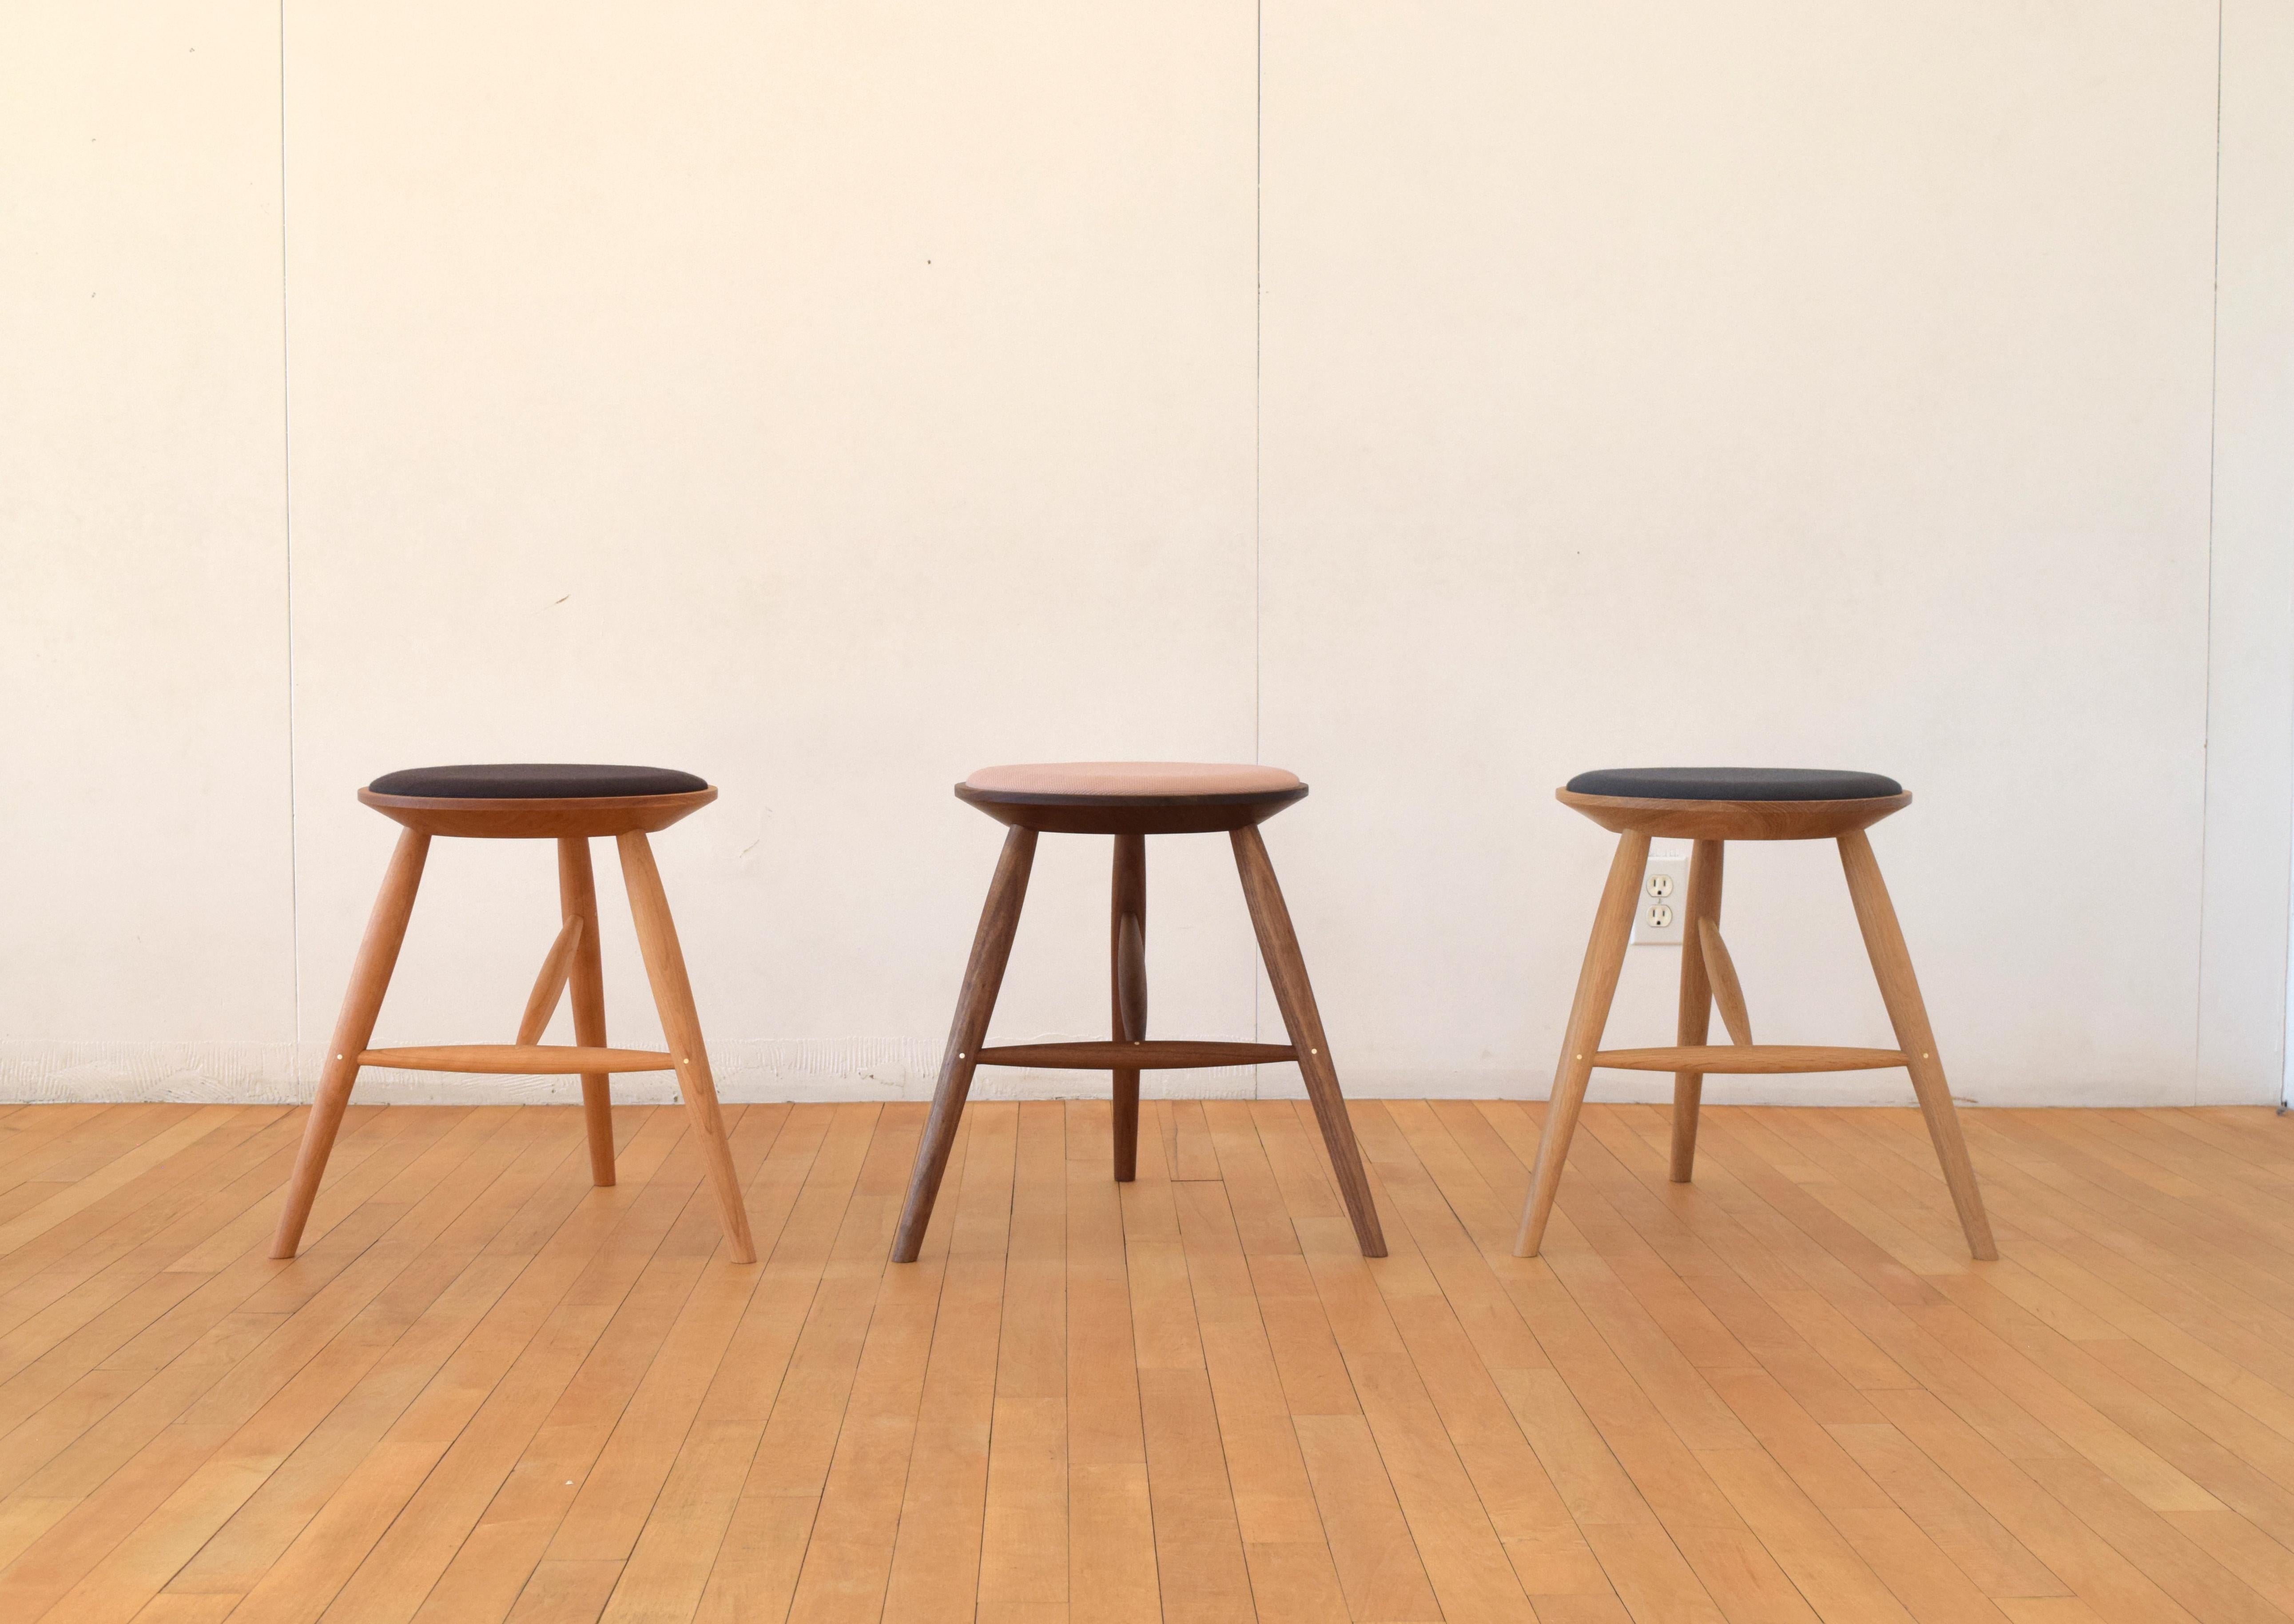 Perch stool is a solid wood, three-legged seating option with an upholstered seat cushion. The stool features traditional woodworking construction including mortise and wedged tenon joinery and brass pins, and is upholstered with 100% wool fabric.  